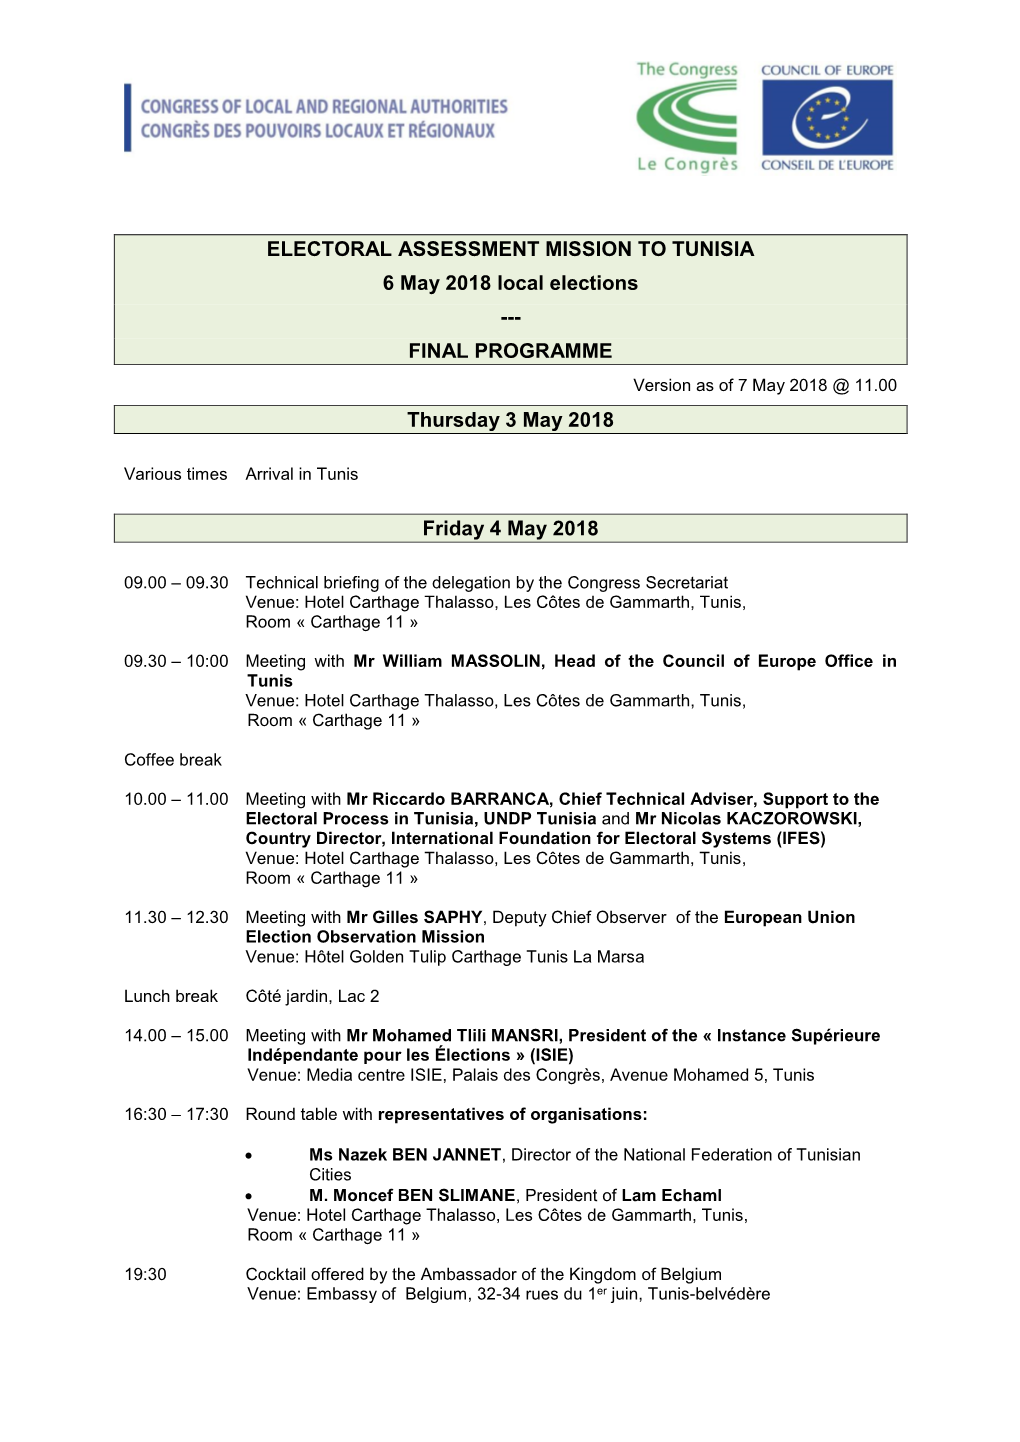 ELECTORAL ASSESSMENT MISSION to TUNISIA 6 May 2018 Local Elections --- FINAL PROGRAMME Version As of 7 May 2018 @ 11.00 Thursday 3 May 2018